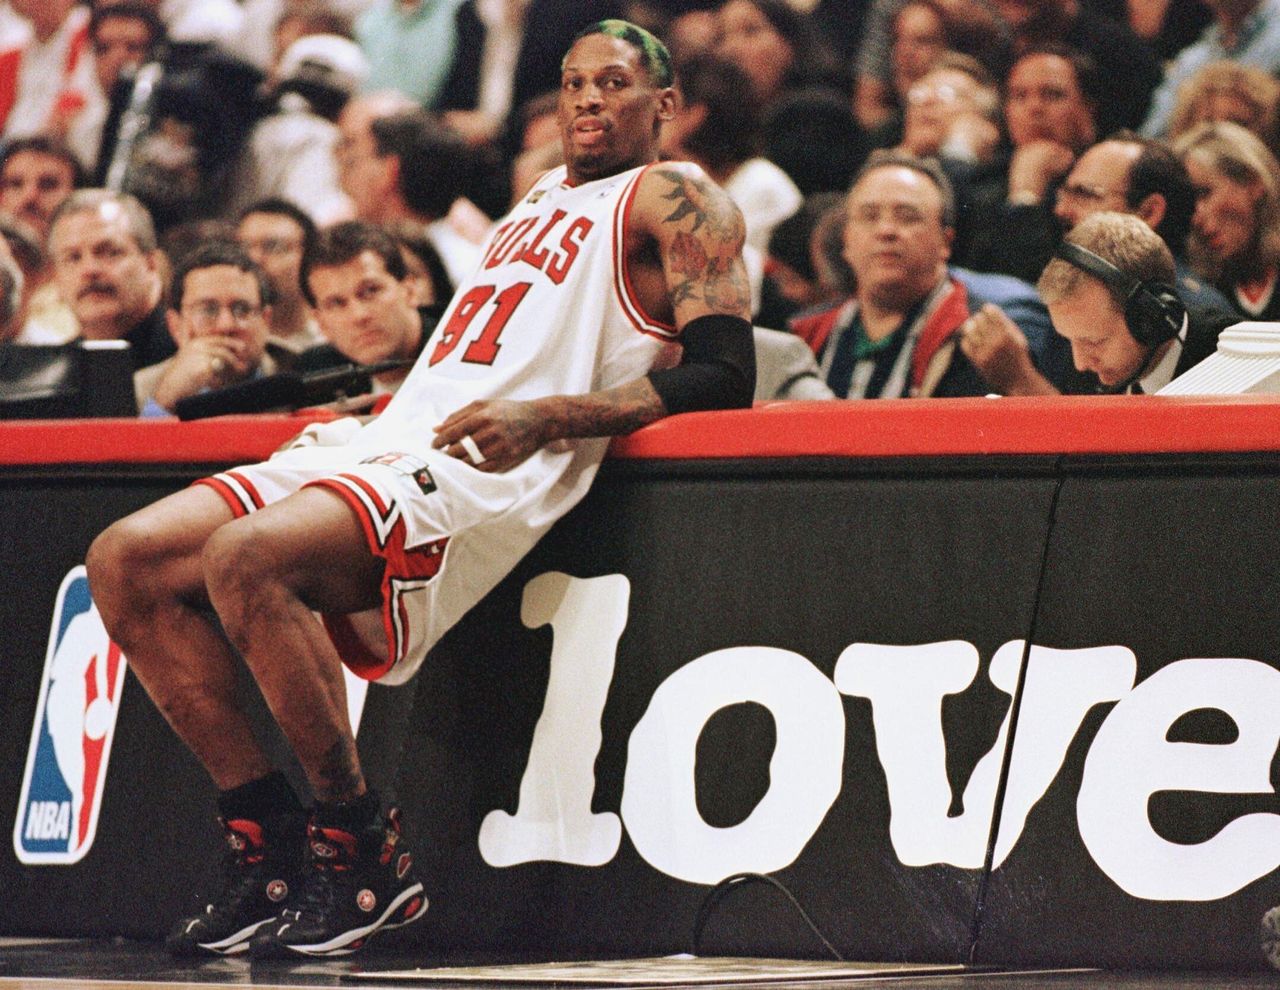 Rodman leans on the scorers' table as he waits to come into the game against the Utah Jazz in game four of the NBA Finals on June 10, 1998.